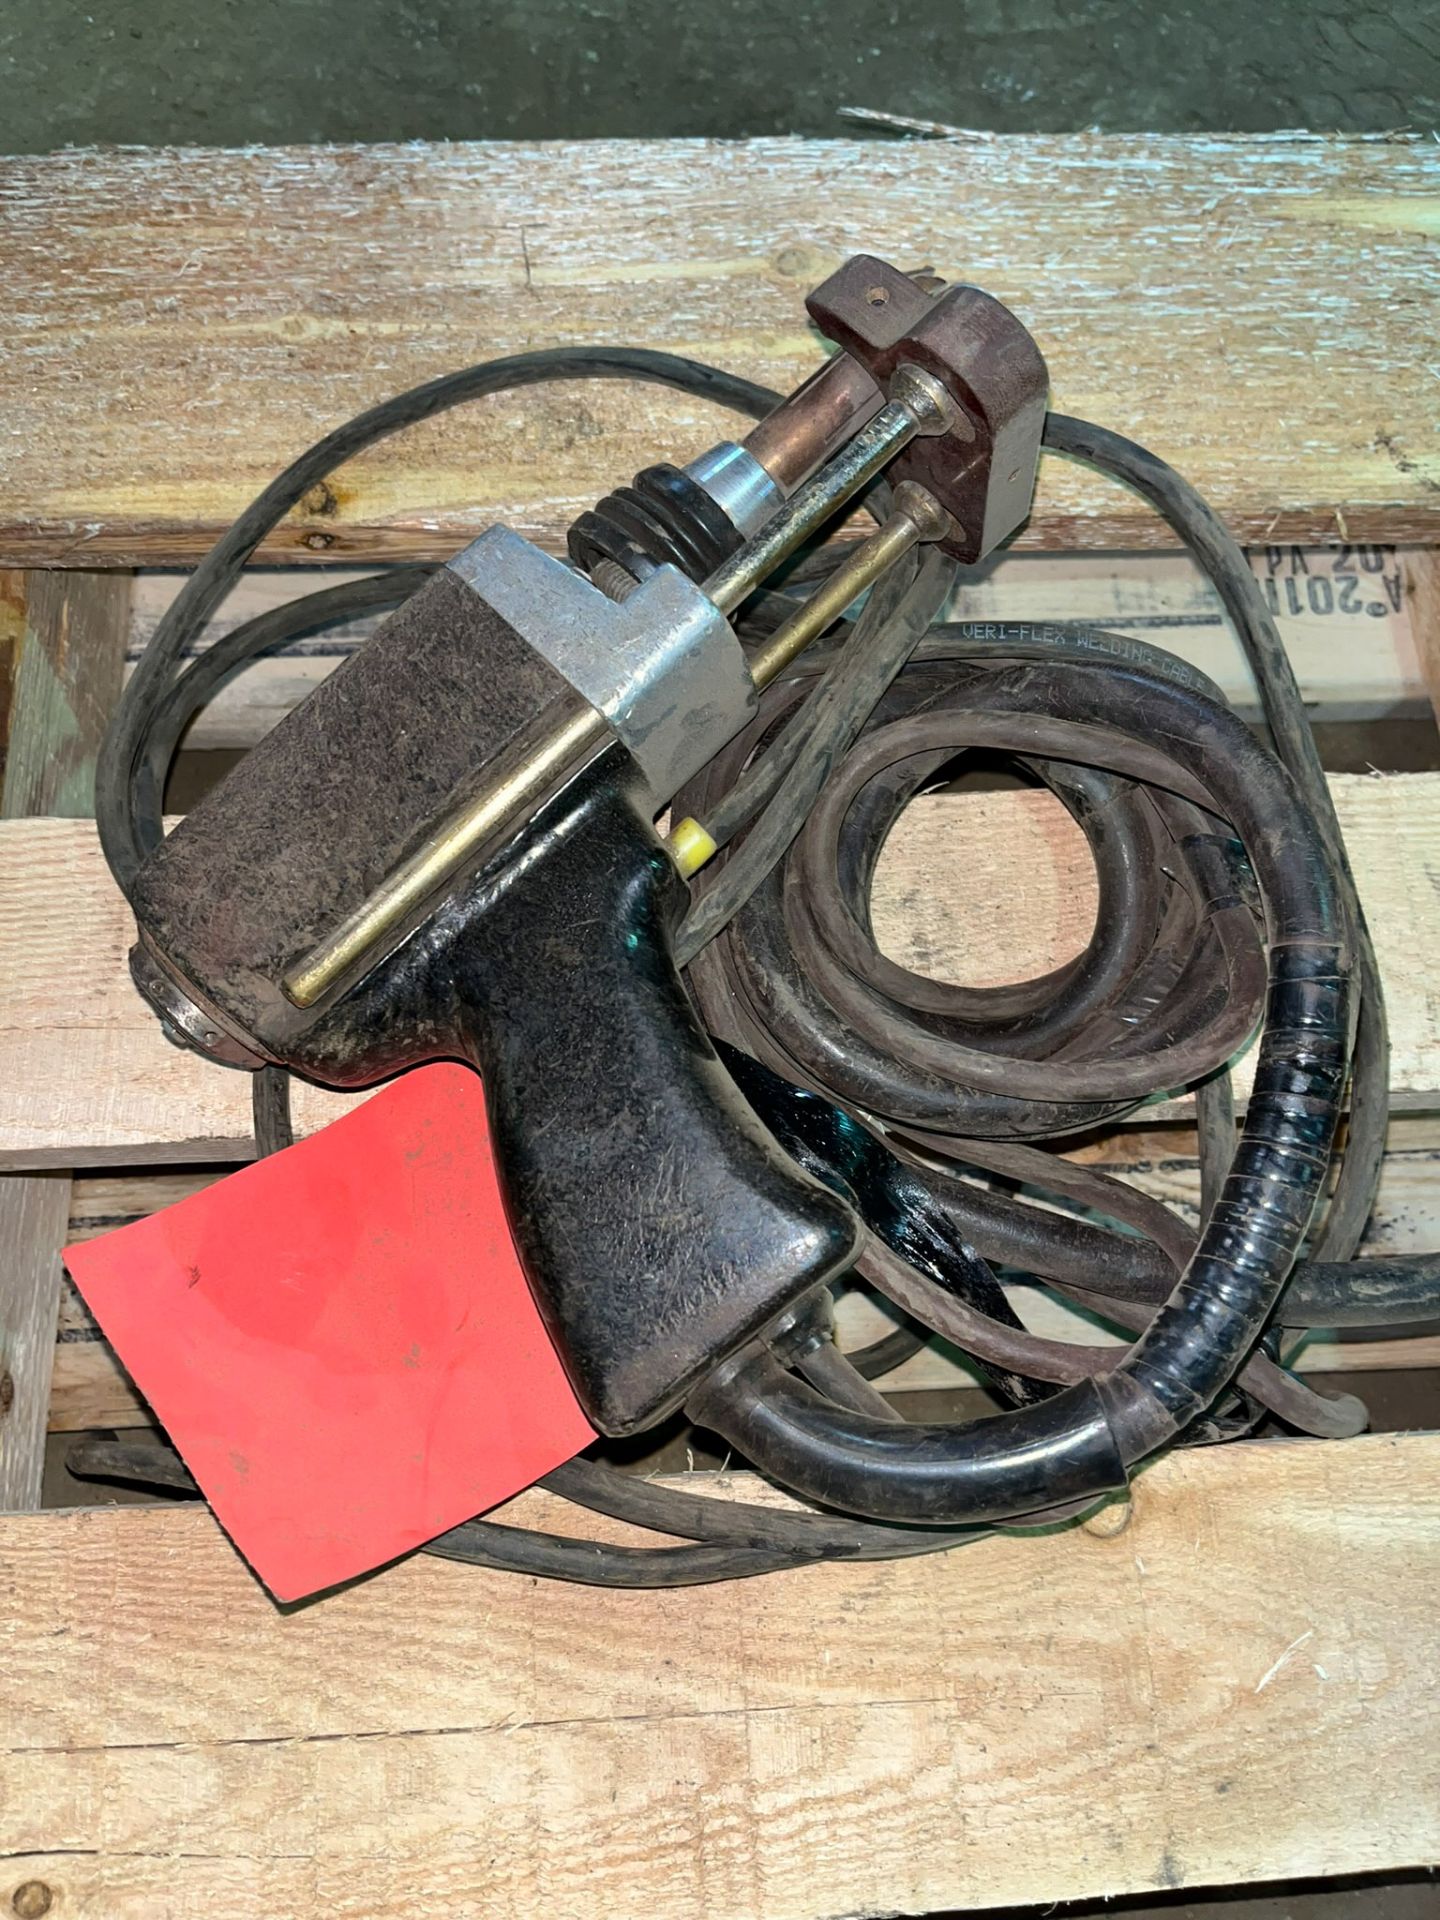 LOT/ NELSON STUD GUN PARTS [RIGGING FEES FOR LOT #111B - $40 USD PLUS APPLICABLE TAXES] - Image 7 of 8